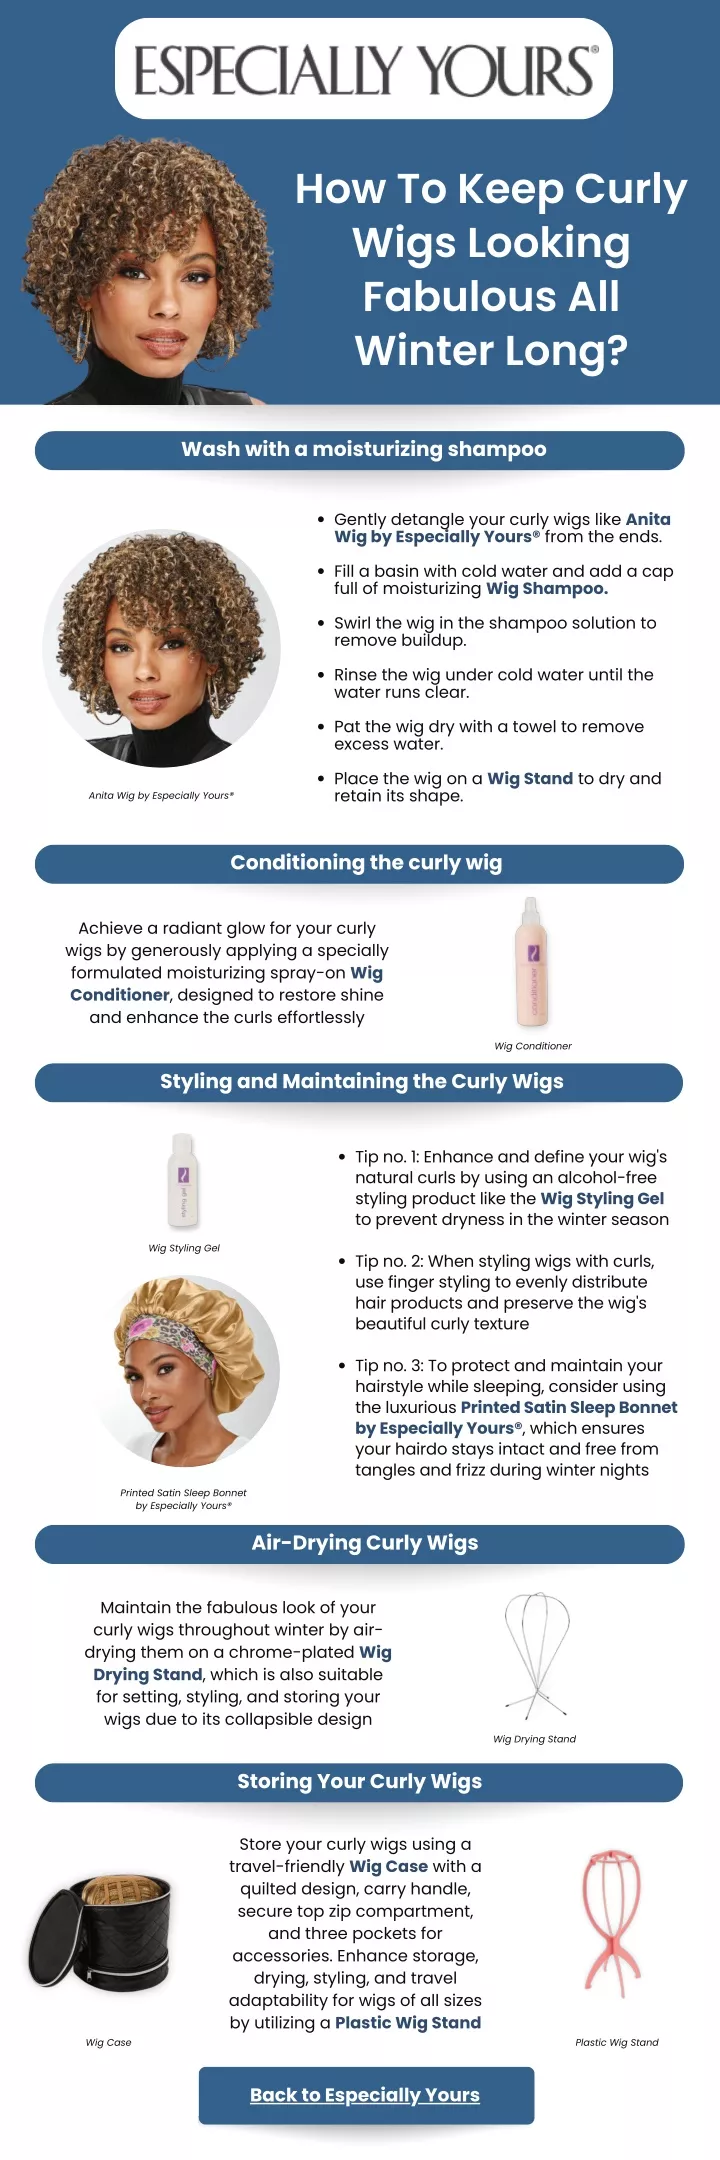 how to keep curly wigs looking fabulous